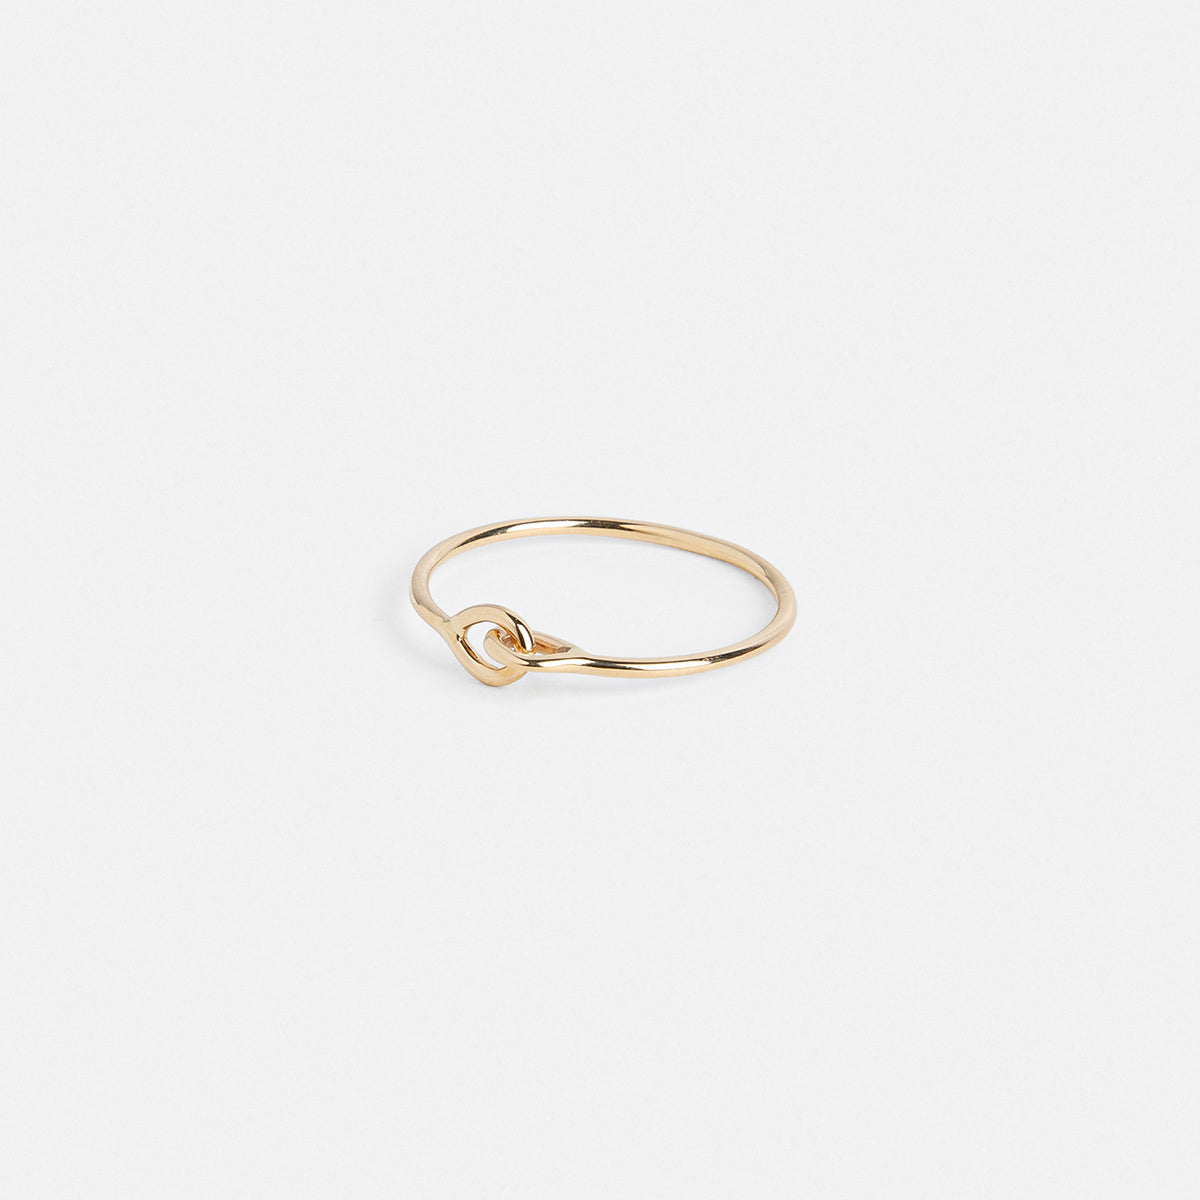 Yra Unique Ring in 14k Gold By SHW Fine Jewelry NYC